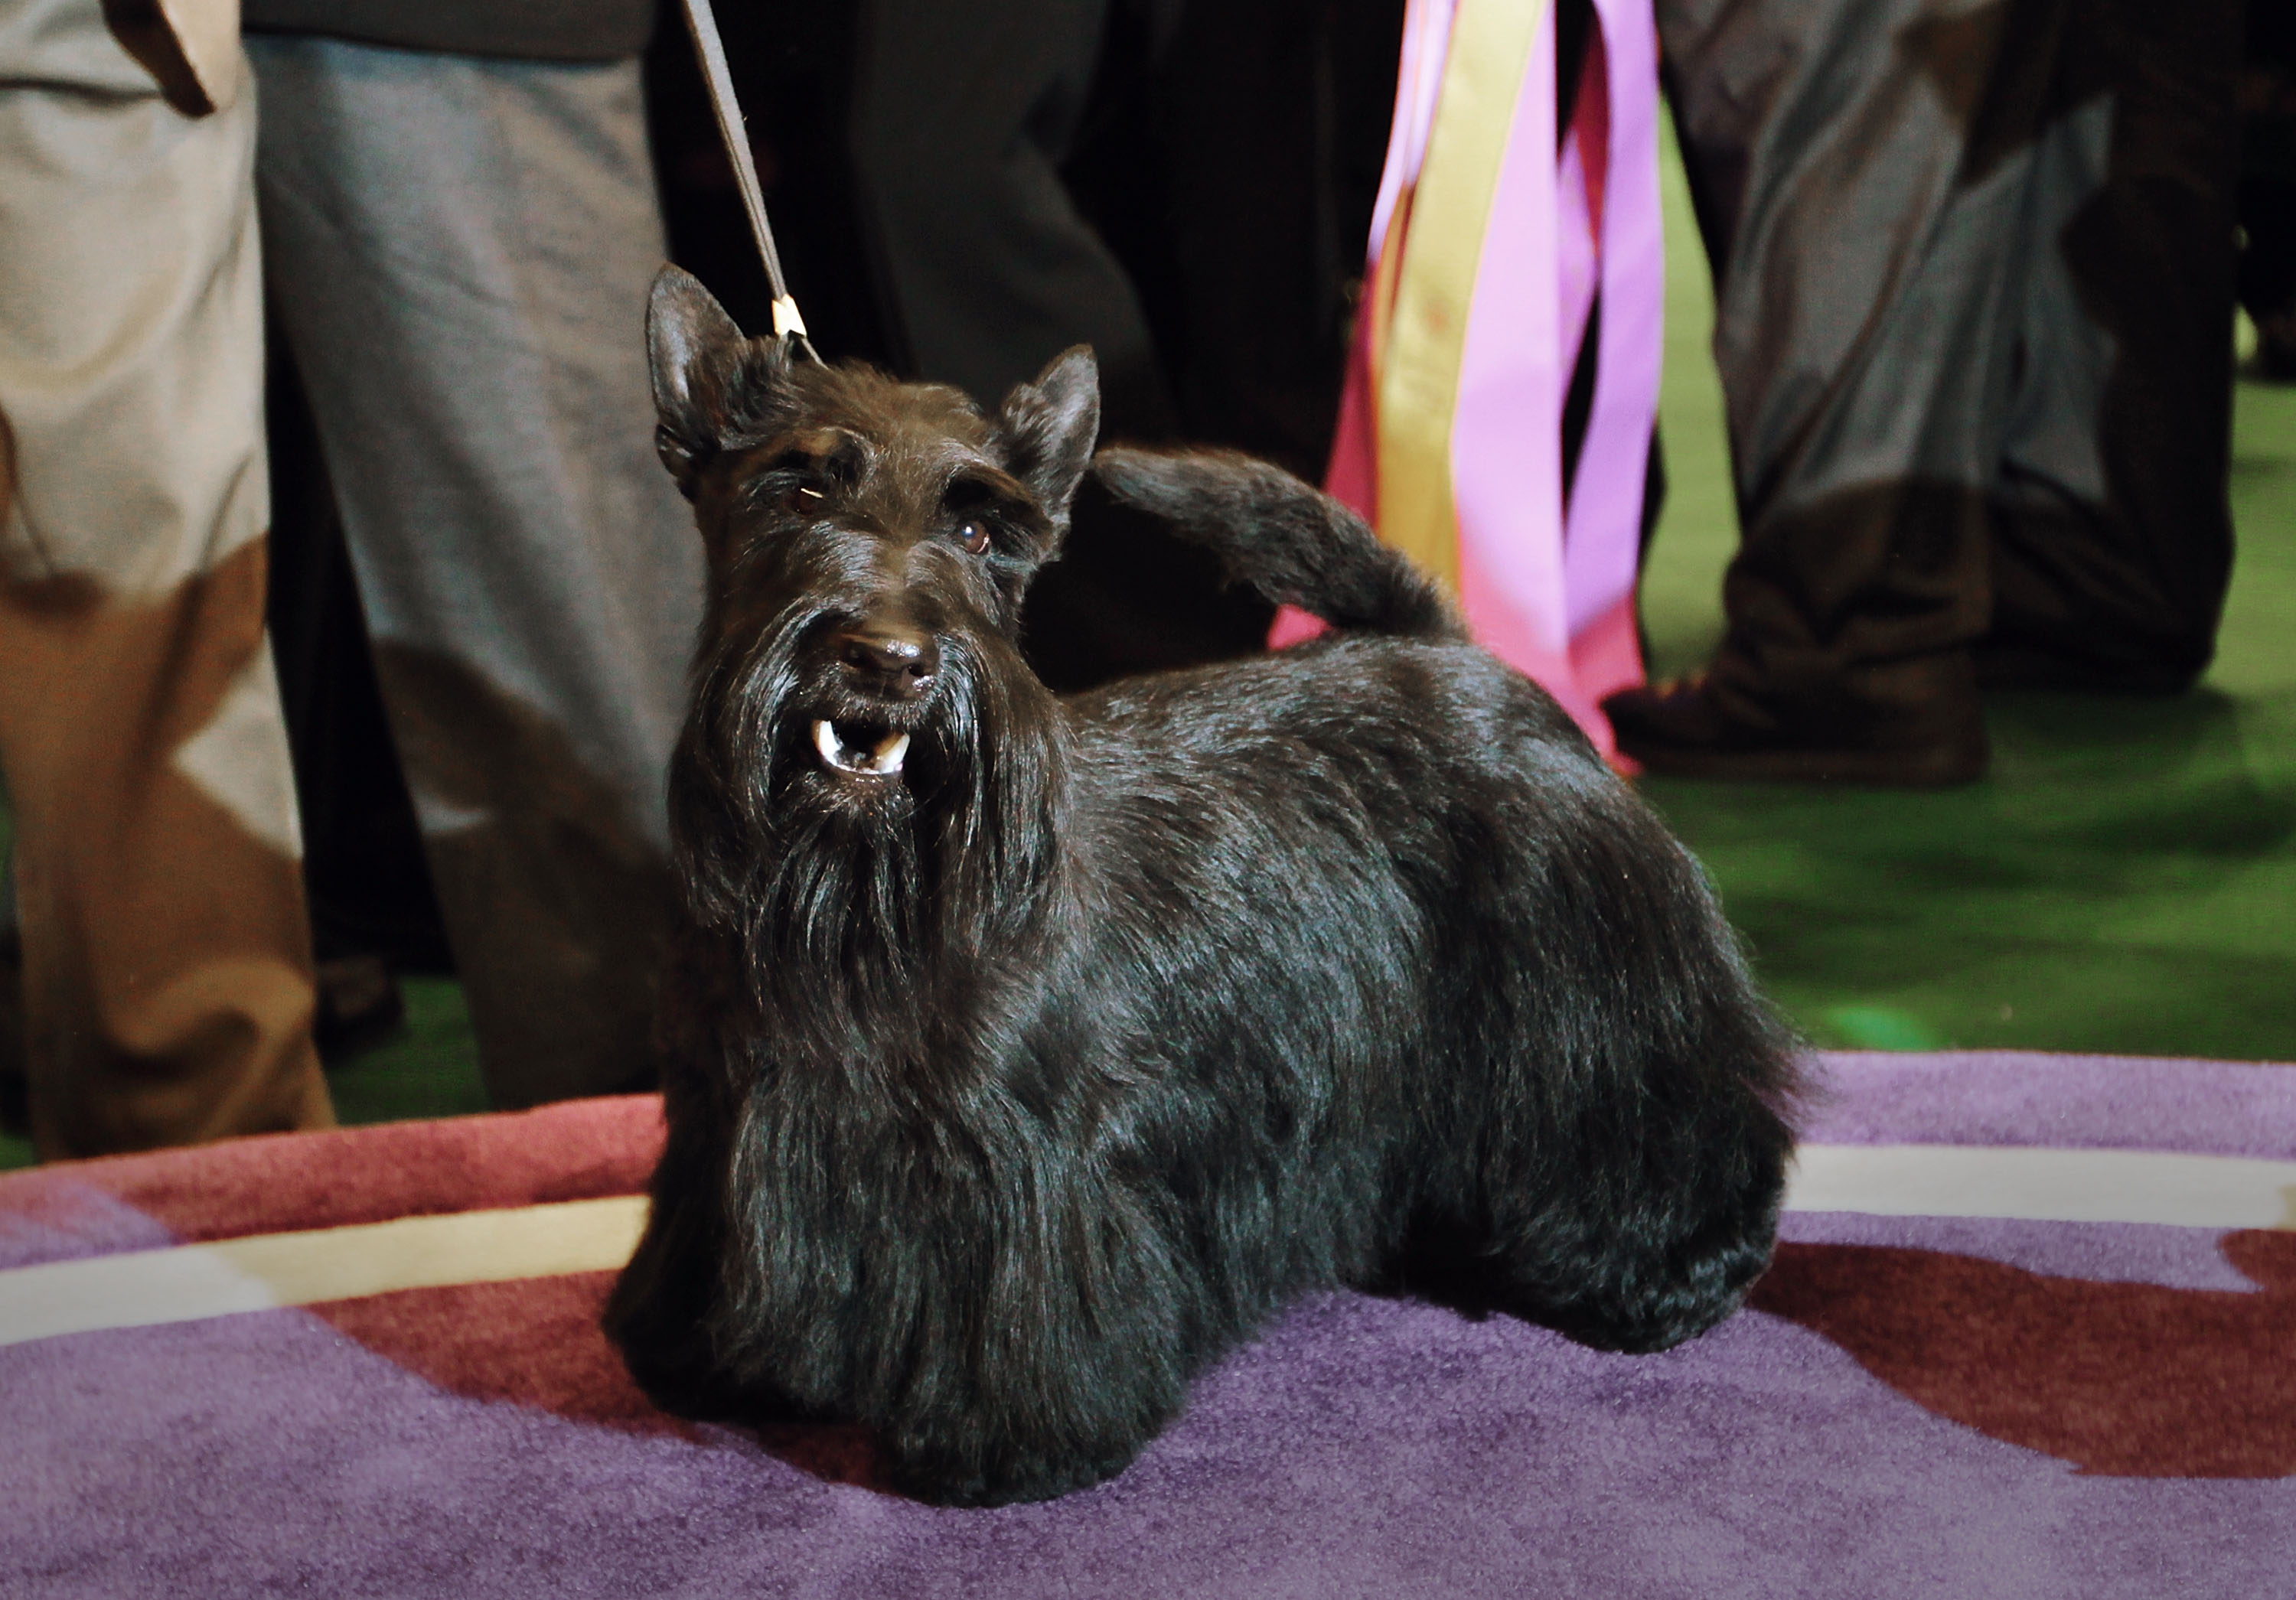 NEW YORK - FEBRUARY 16: Sadie, a Scottish Terrier, won Best in Show at the Westminster Kennel Club Dog Show February 16, 2010 in New York City. The 134th Westminster Kennel Club Dog Show is taking place at New York's Madison Square Garden, and dog breeders from around the country and world have flown in to take part. (Photo by Chris Hondros/Getty Images) ORG XMIT: 95916557 GTY ID: 16557CH029_MADISON_SQUAR